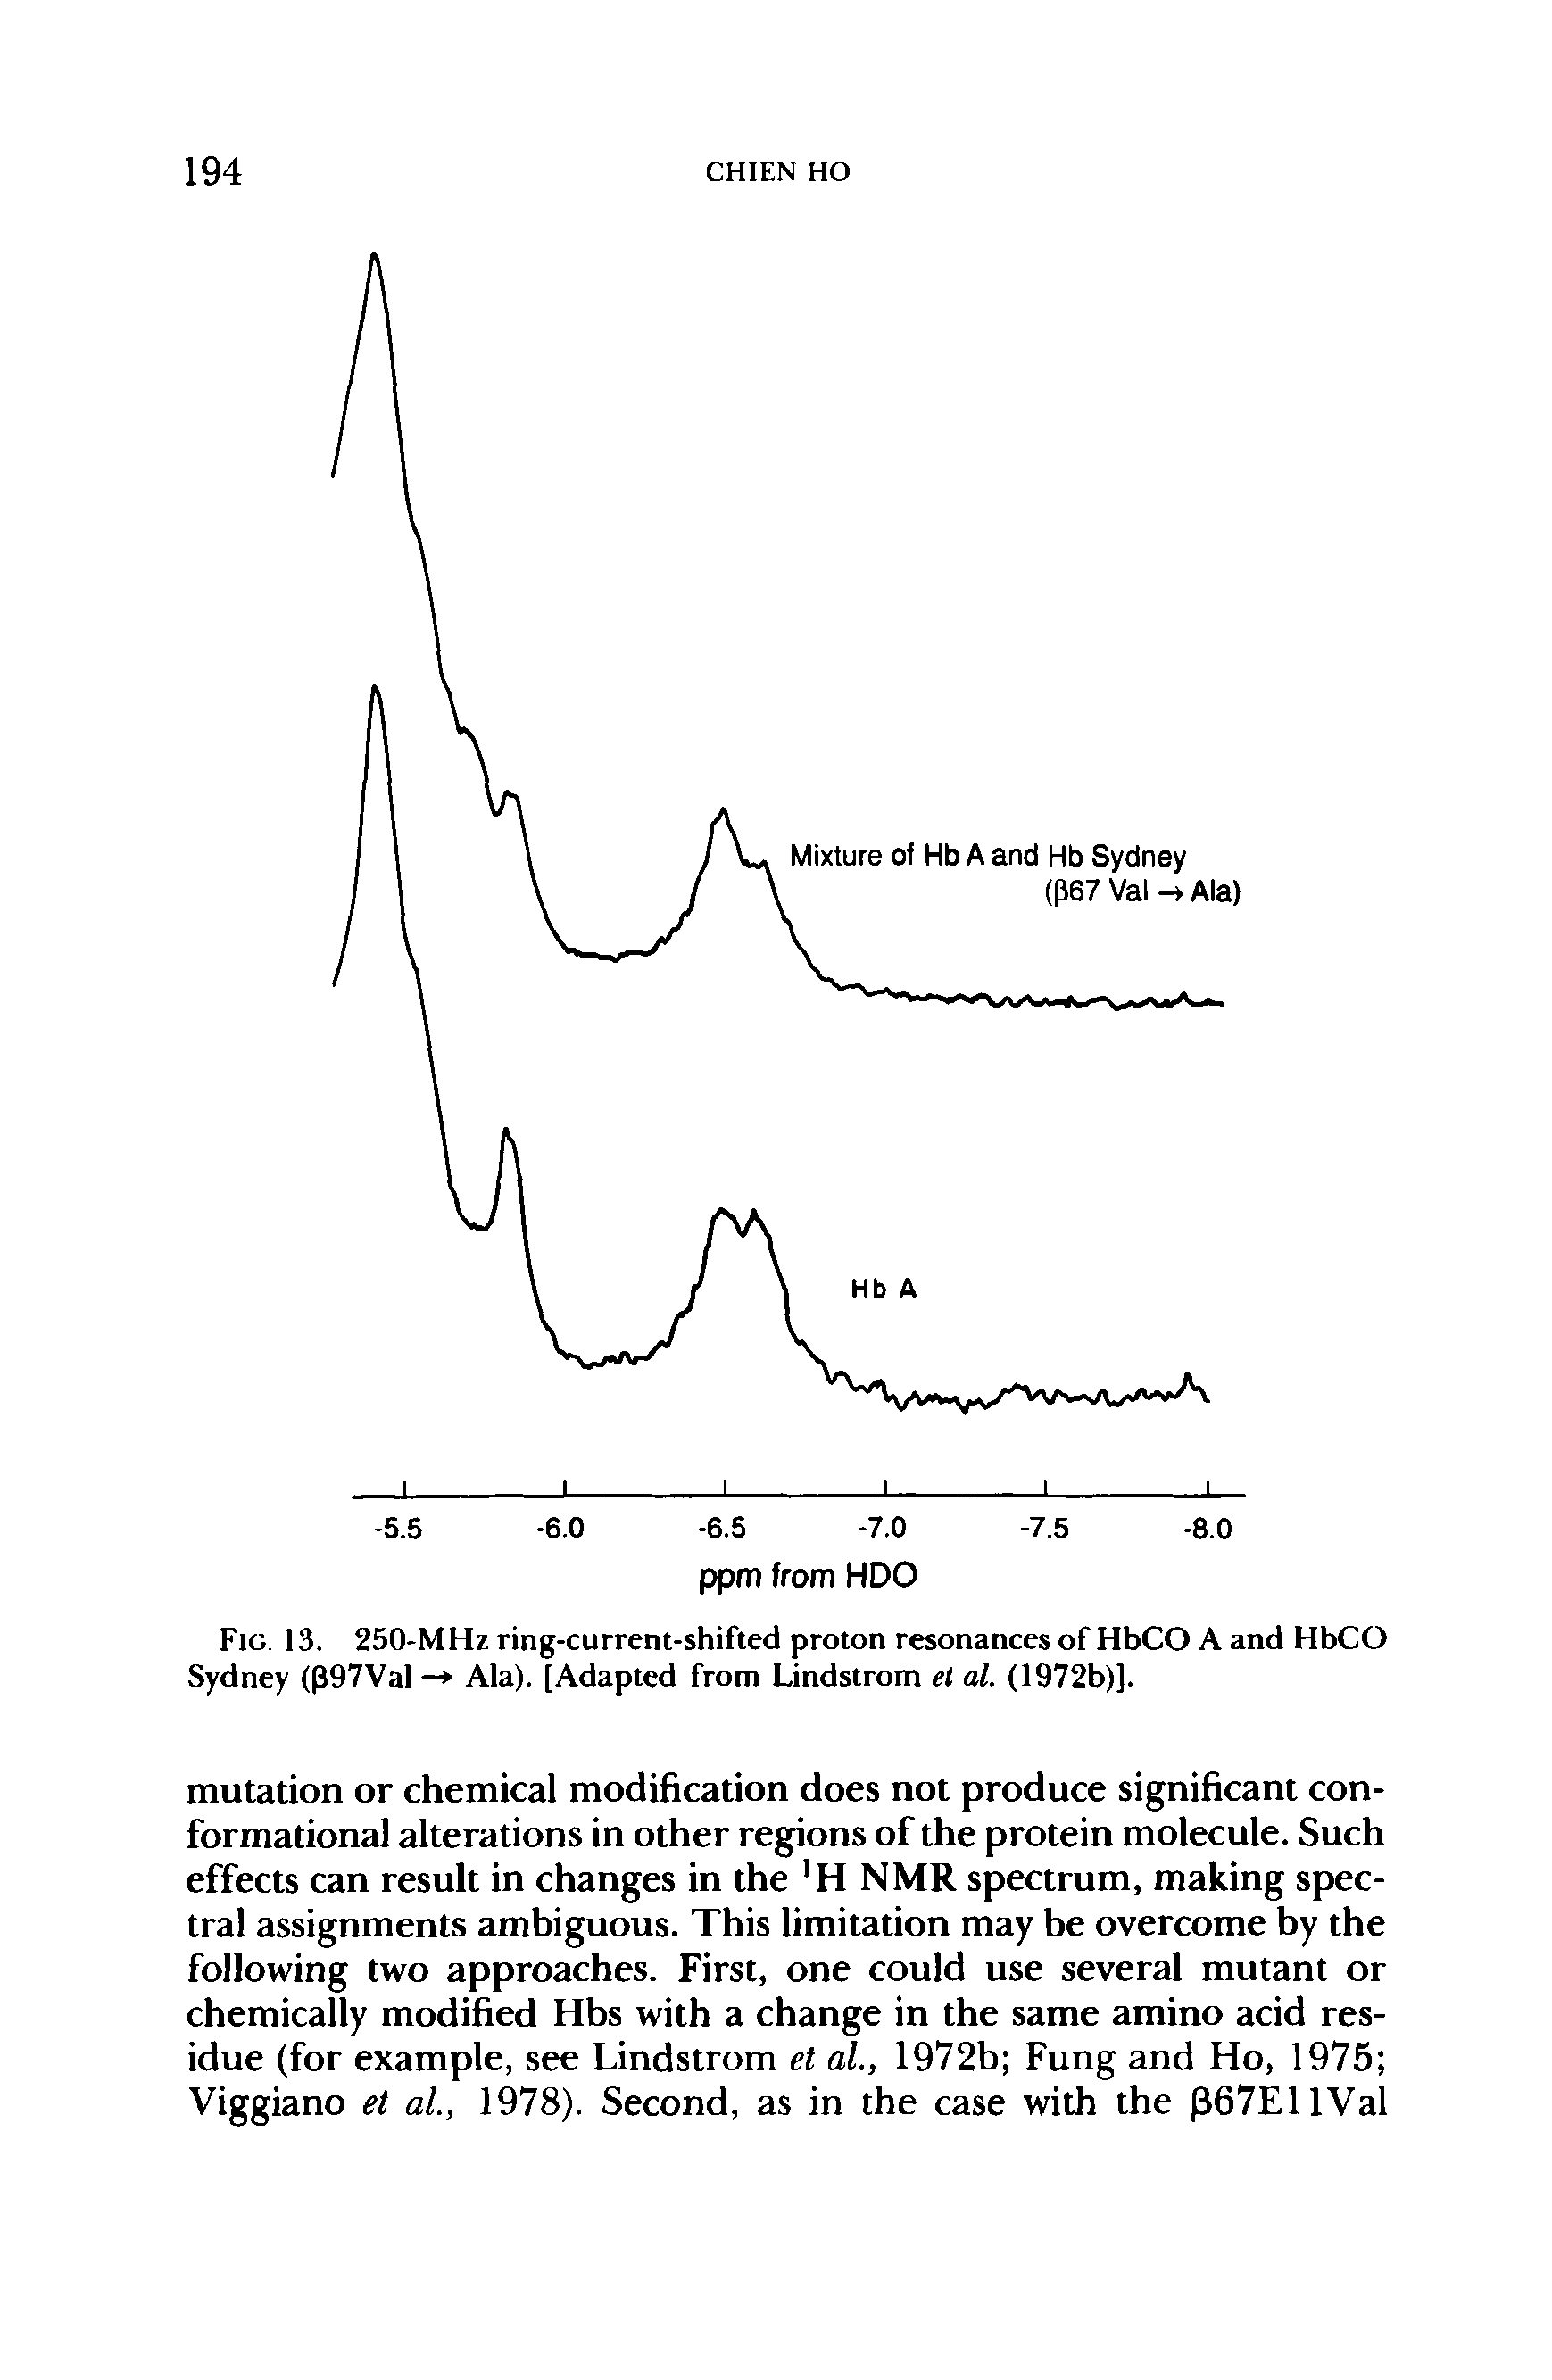 Fig. 13. 250-MHz ring-current-shifted proton resonances of HbCO A and HbCO Sydney (p97Val — Ala). [Adapted from Lindstrom et at. (1972b)].